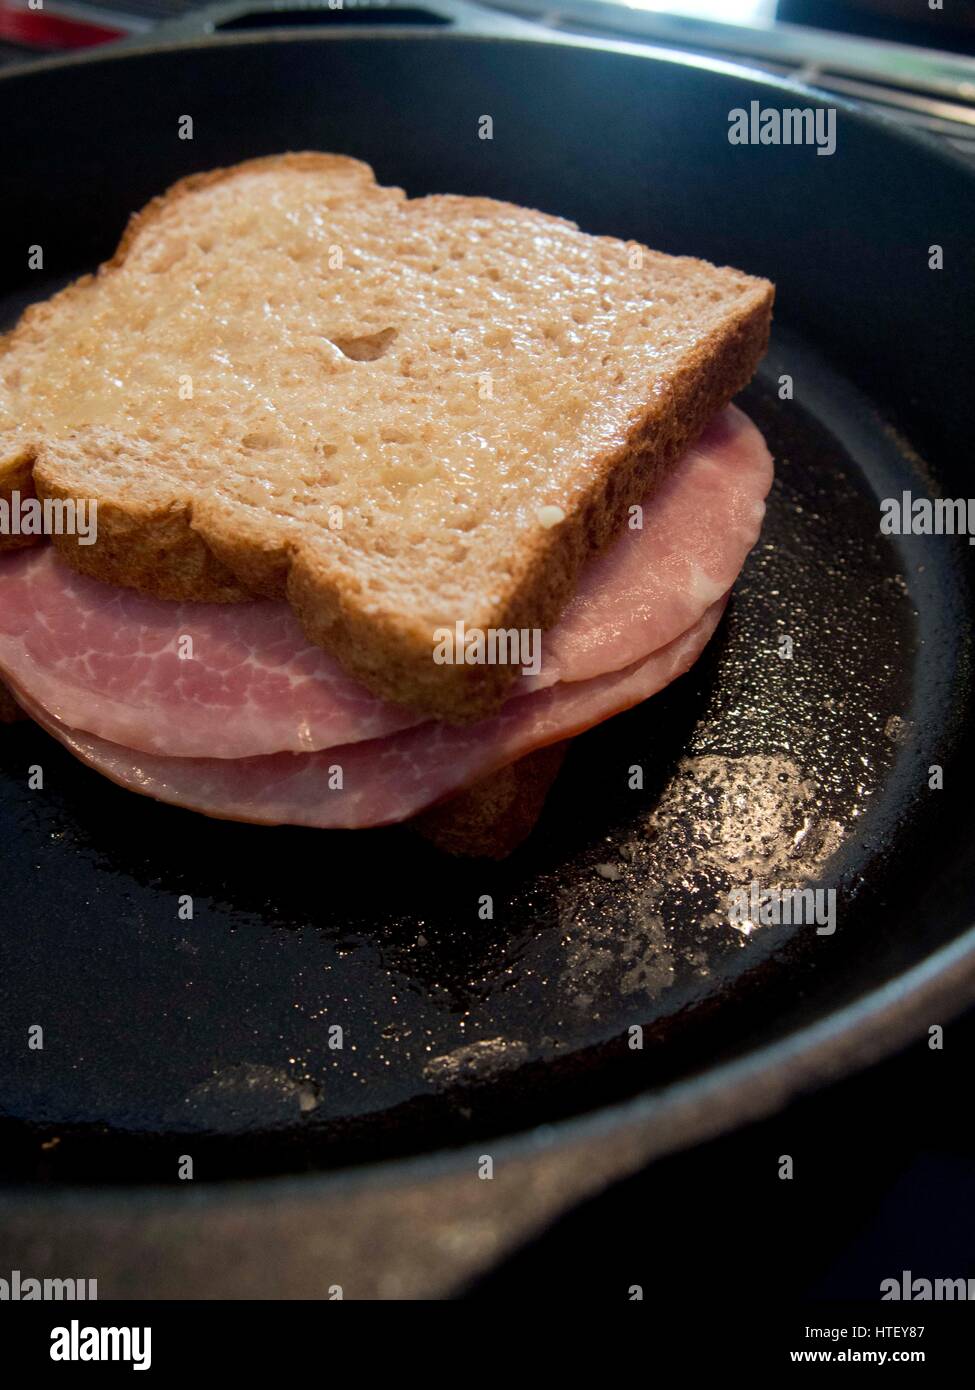 Ingredients and making of a croque monsieur French ham and cheese sandwich, toasted, meal, gruyere, Stock Photo